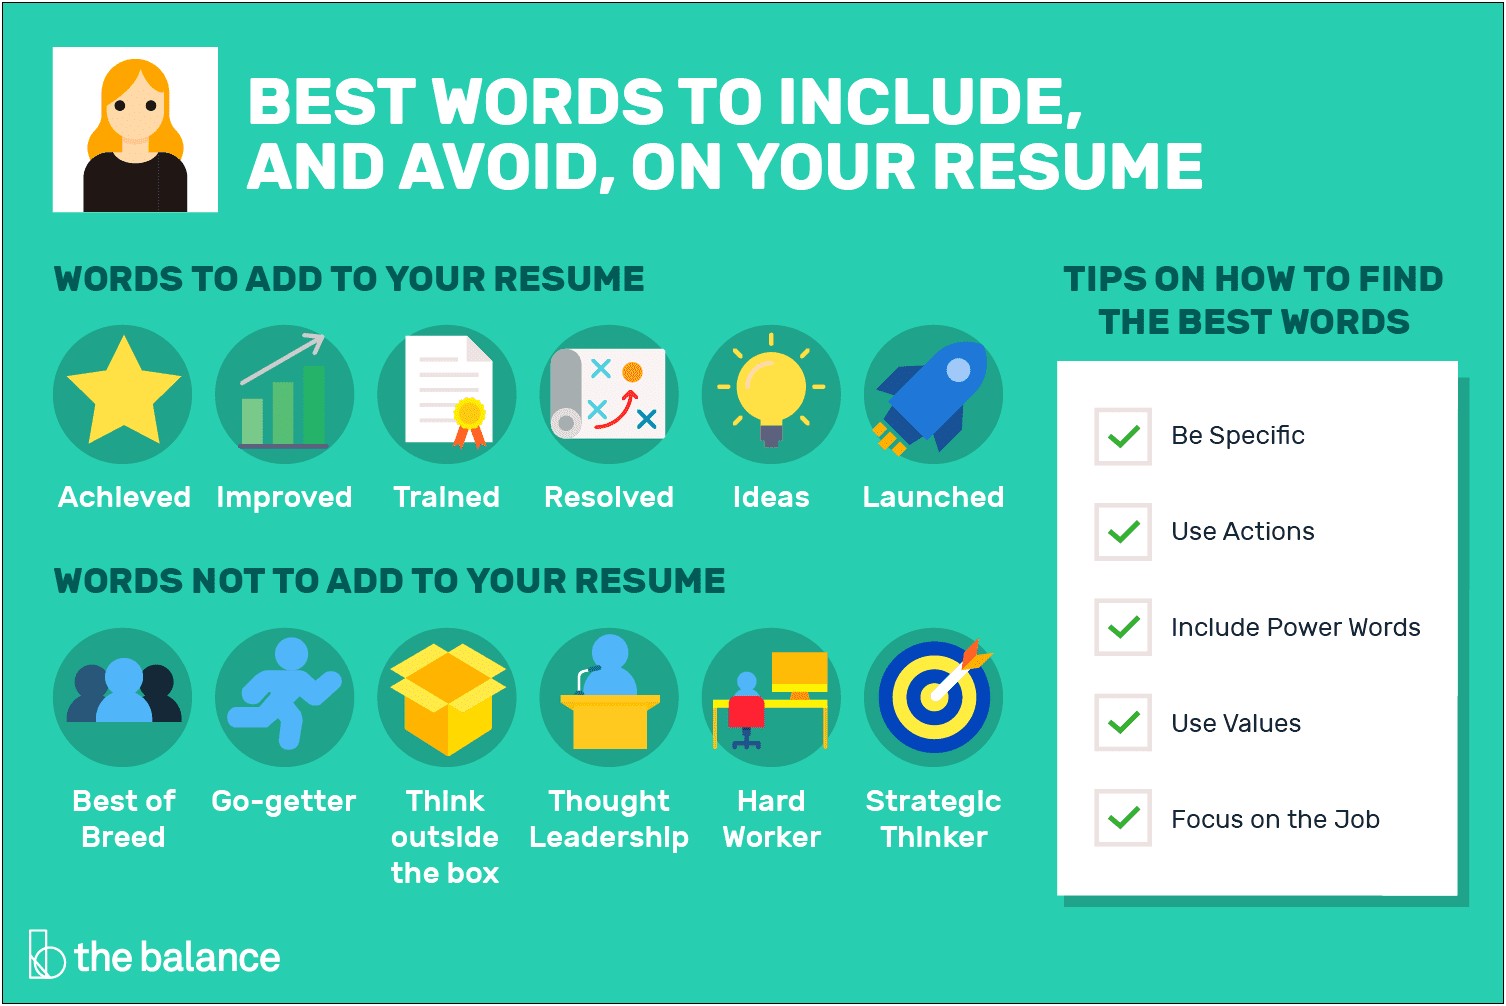 Best Skills To List On Your Resume